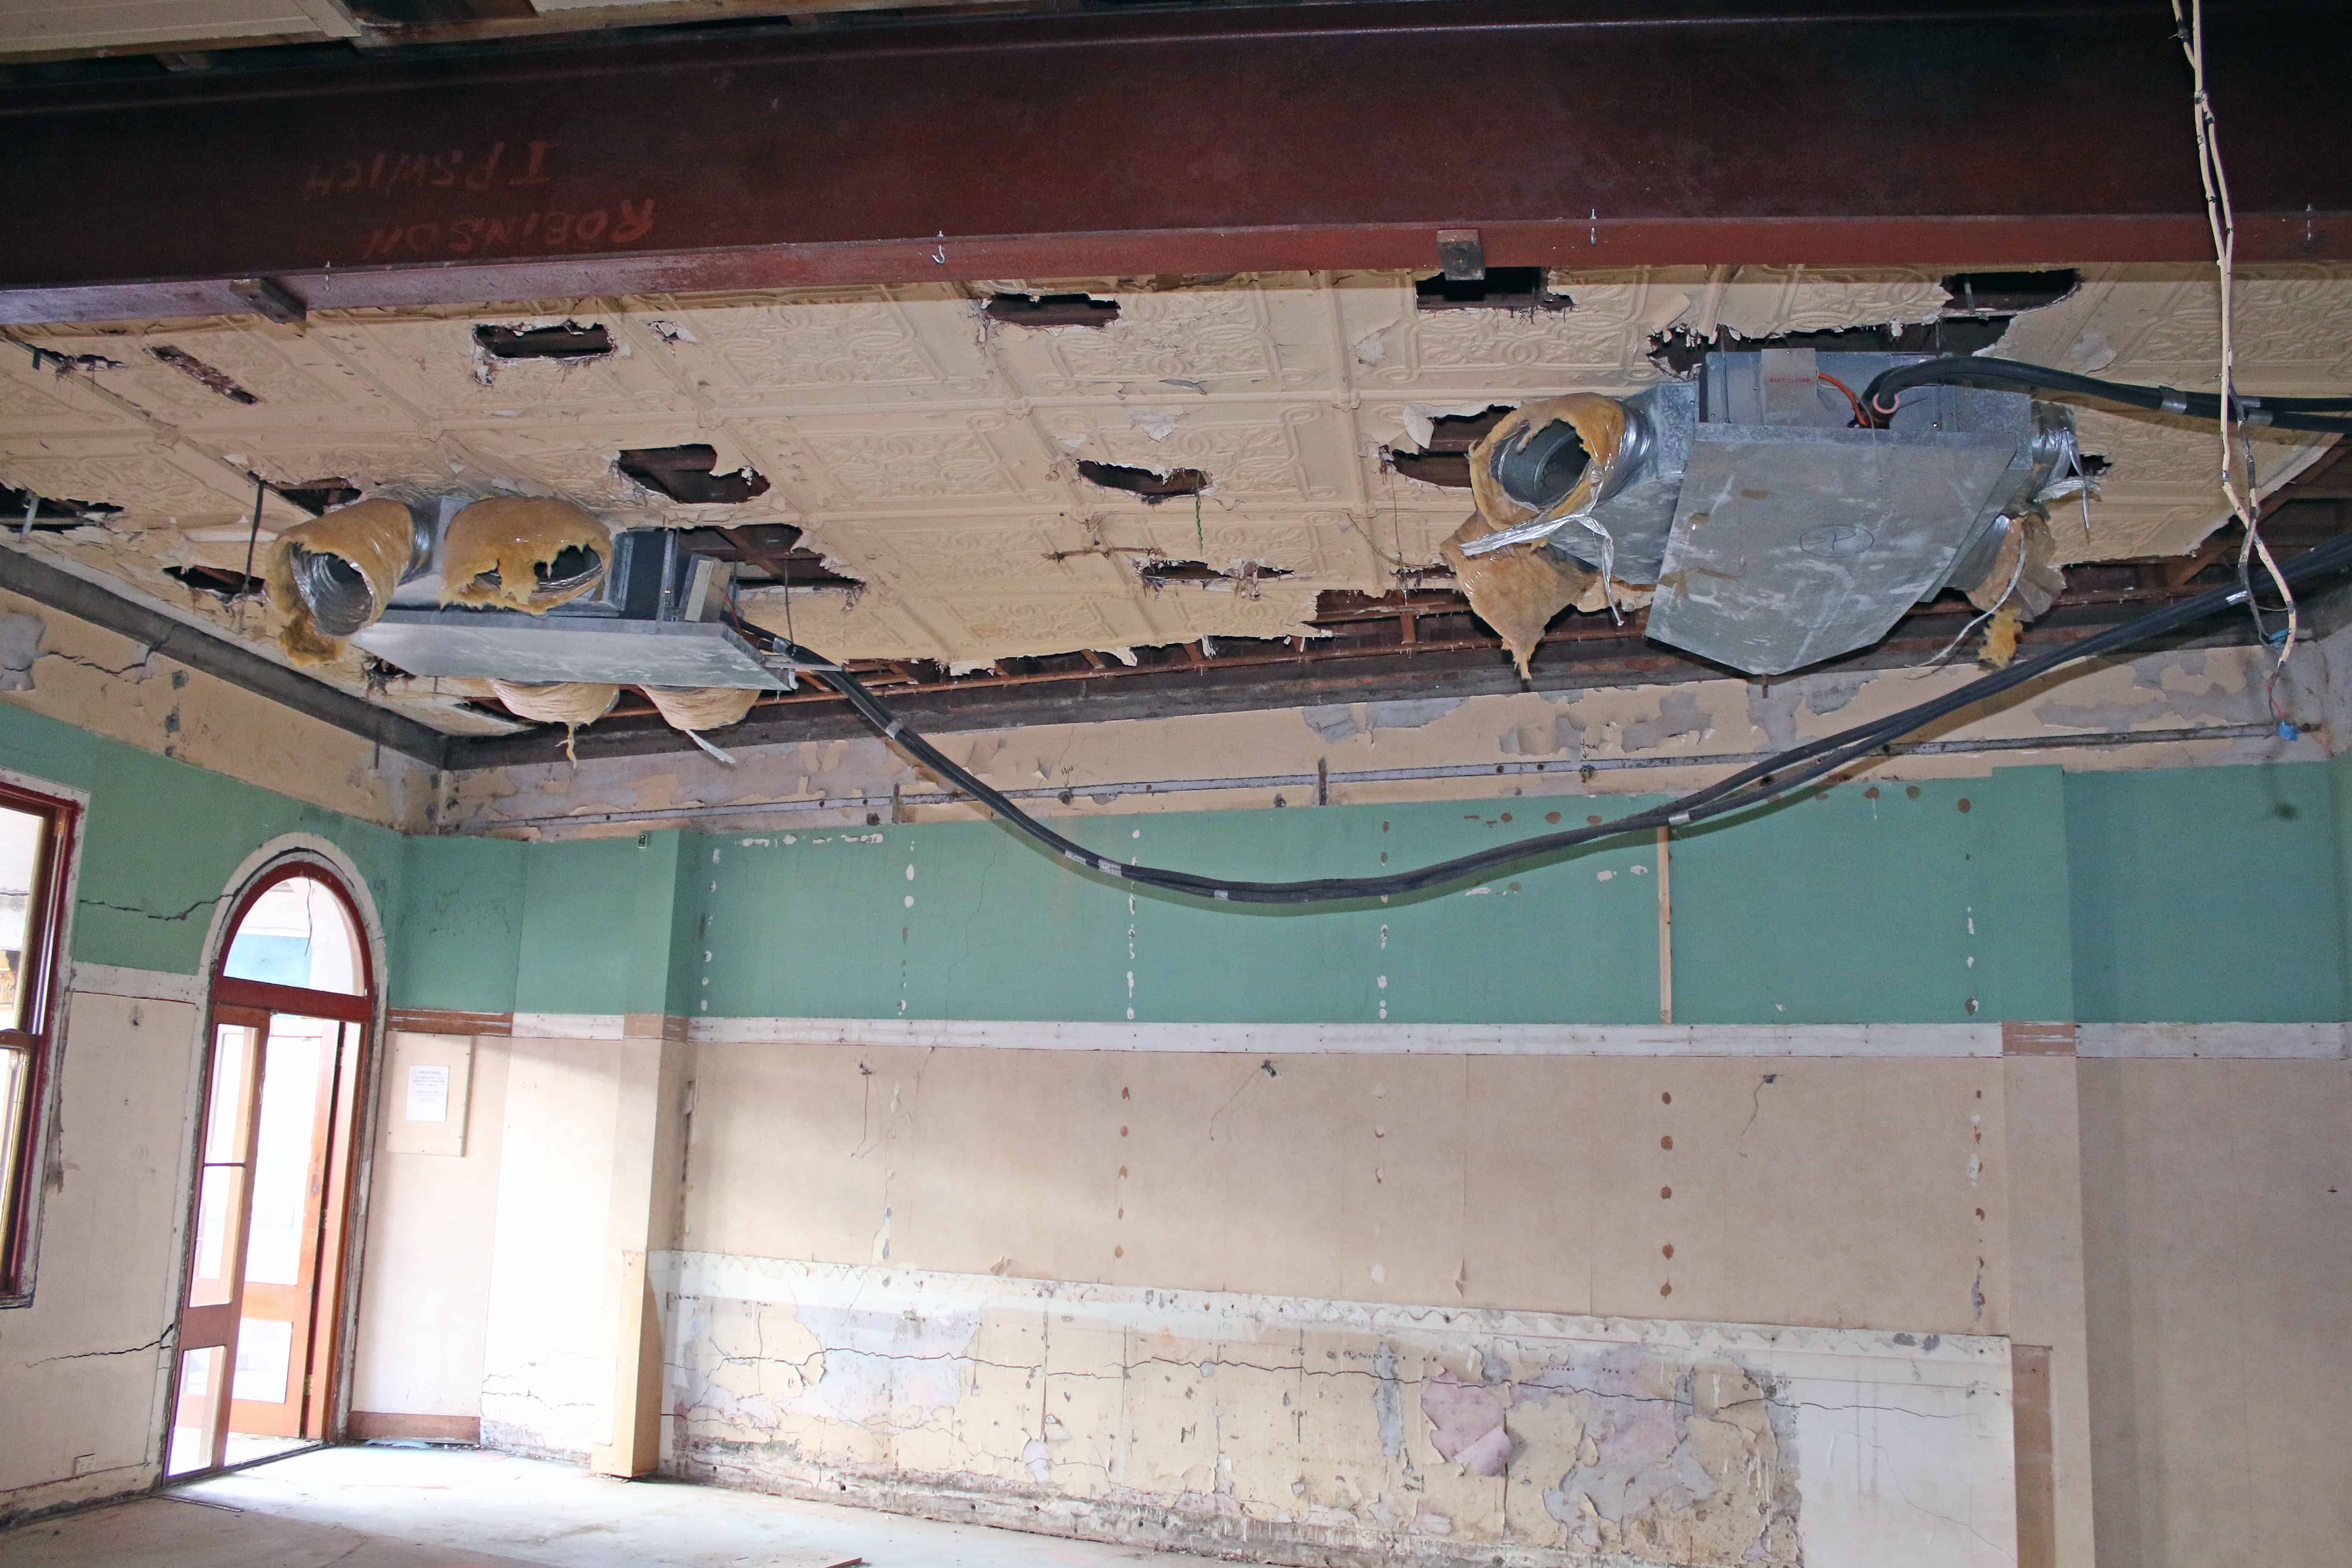 Original Plaster Ceiling Destroyed To Install Aircon Ducts